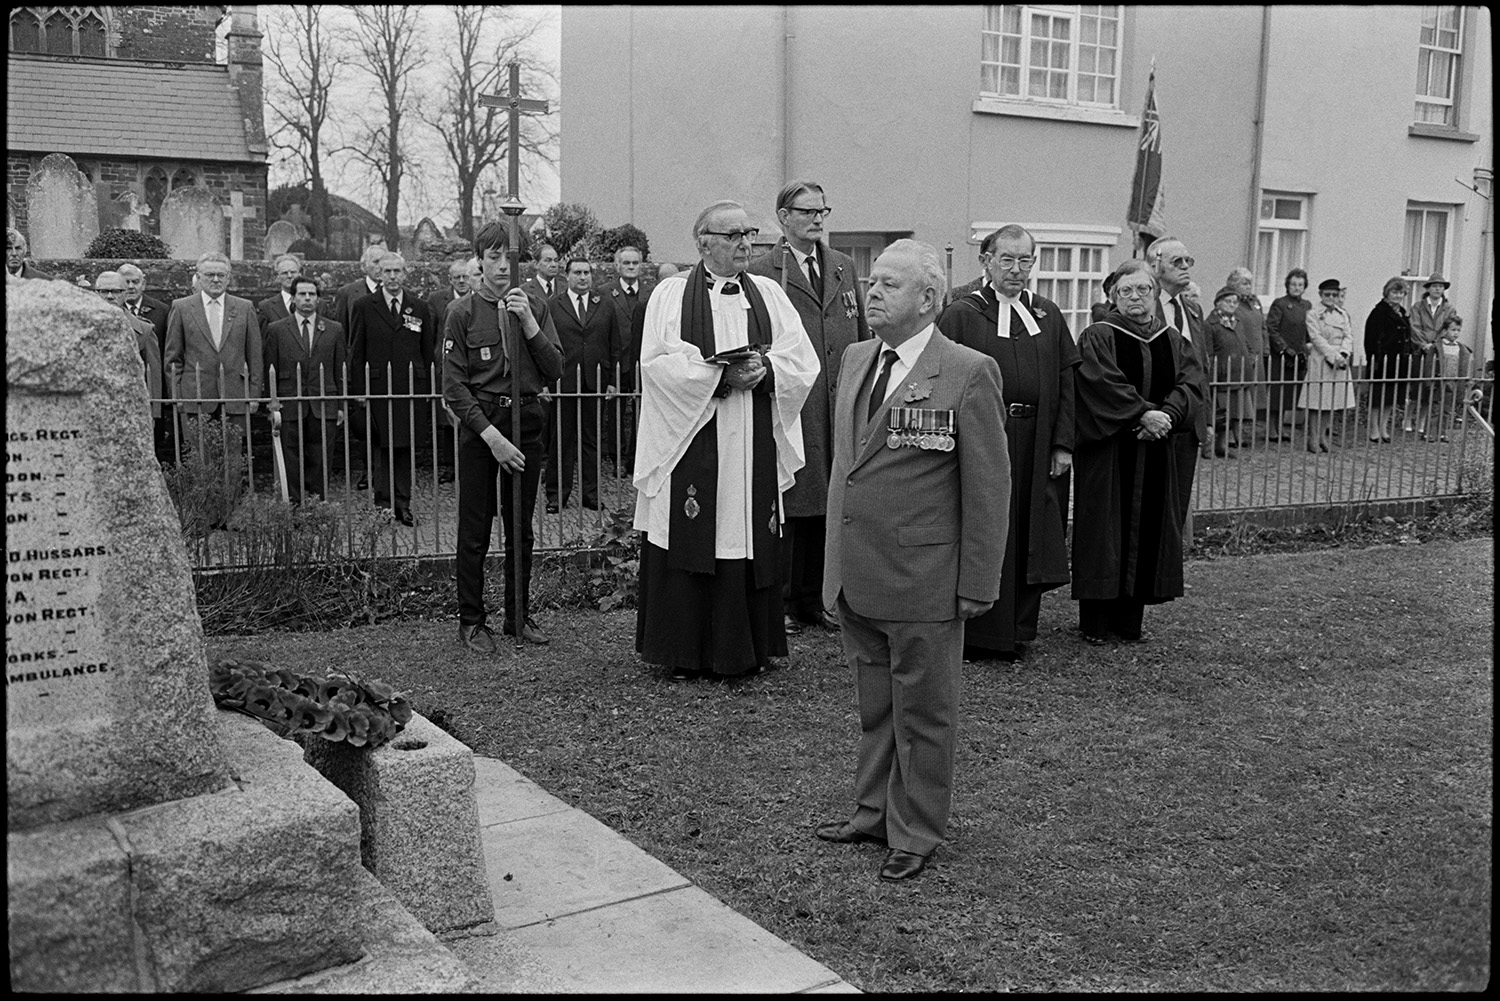 Parade at Memorial, laying wreaths by men, women and scouts. Vicar saying prayers.
[Men and women assembling for the Remembrance Sunday wreath laying ceremony at the war memorial in the square at Chulmleigh. Some men are wearing medals. The Reverend John Richards is taking the service and a man has just laid a wreath. A scout carries a cross, and a woman carries a British Legion flag in the background.]